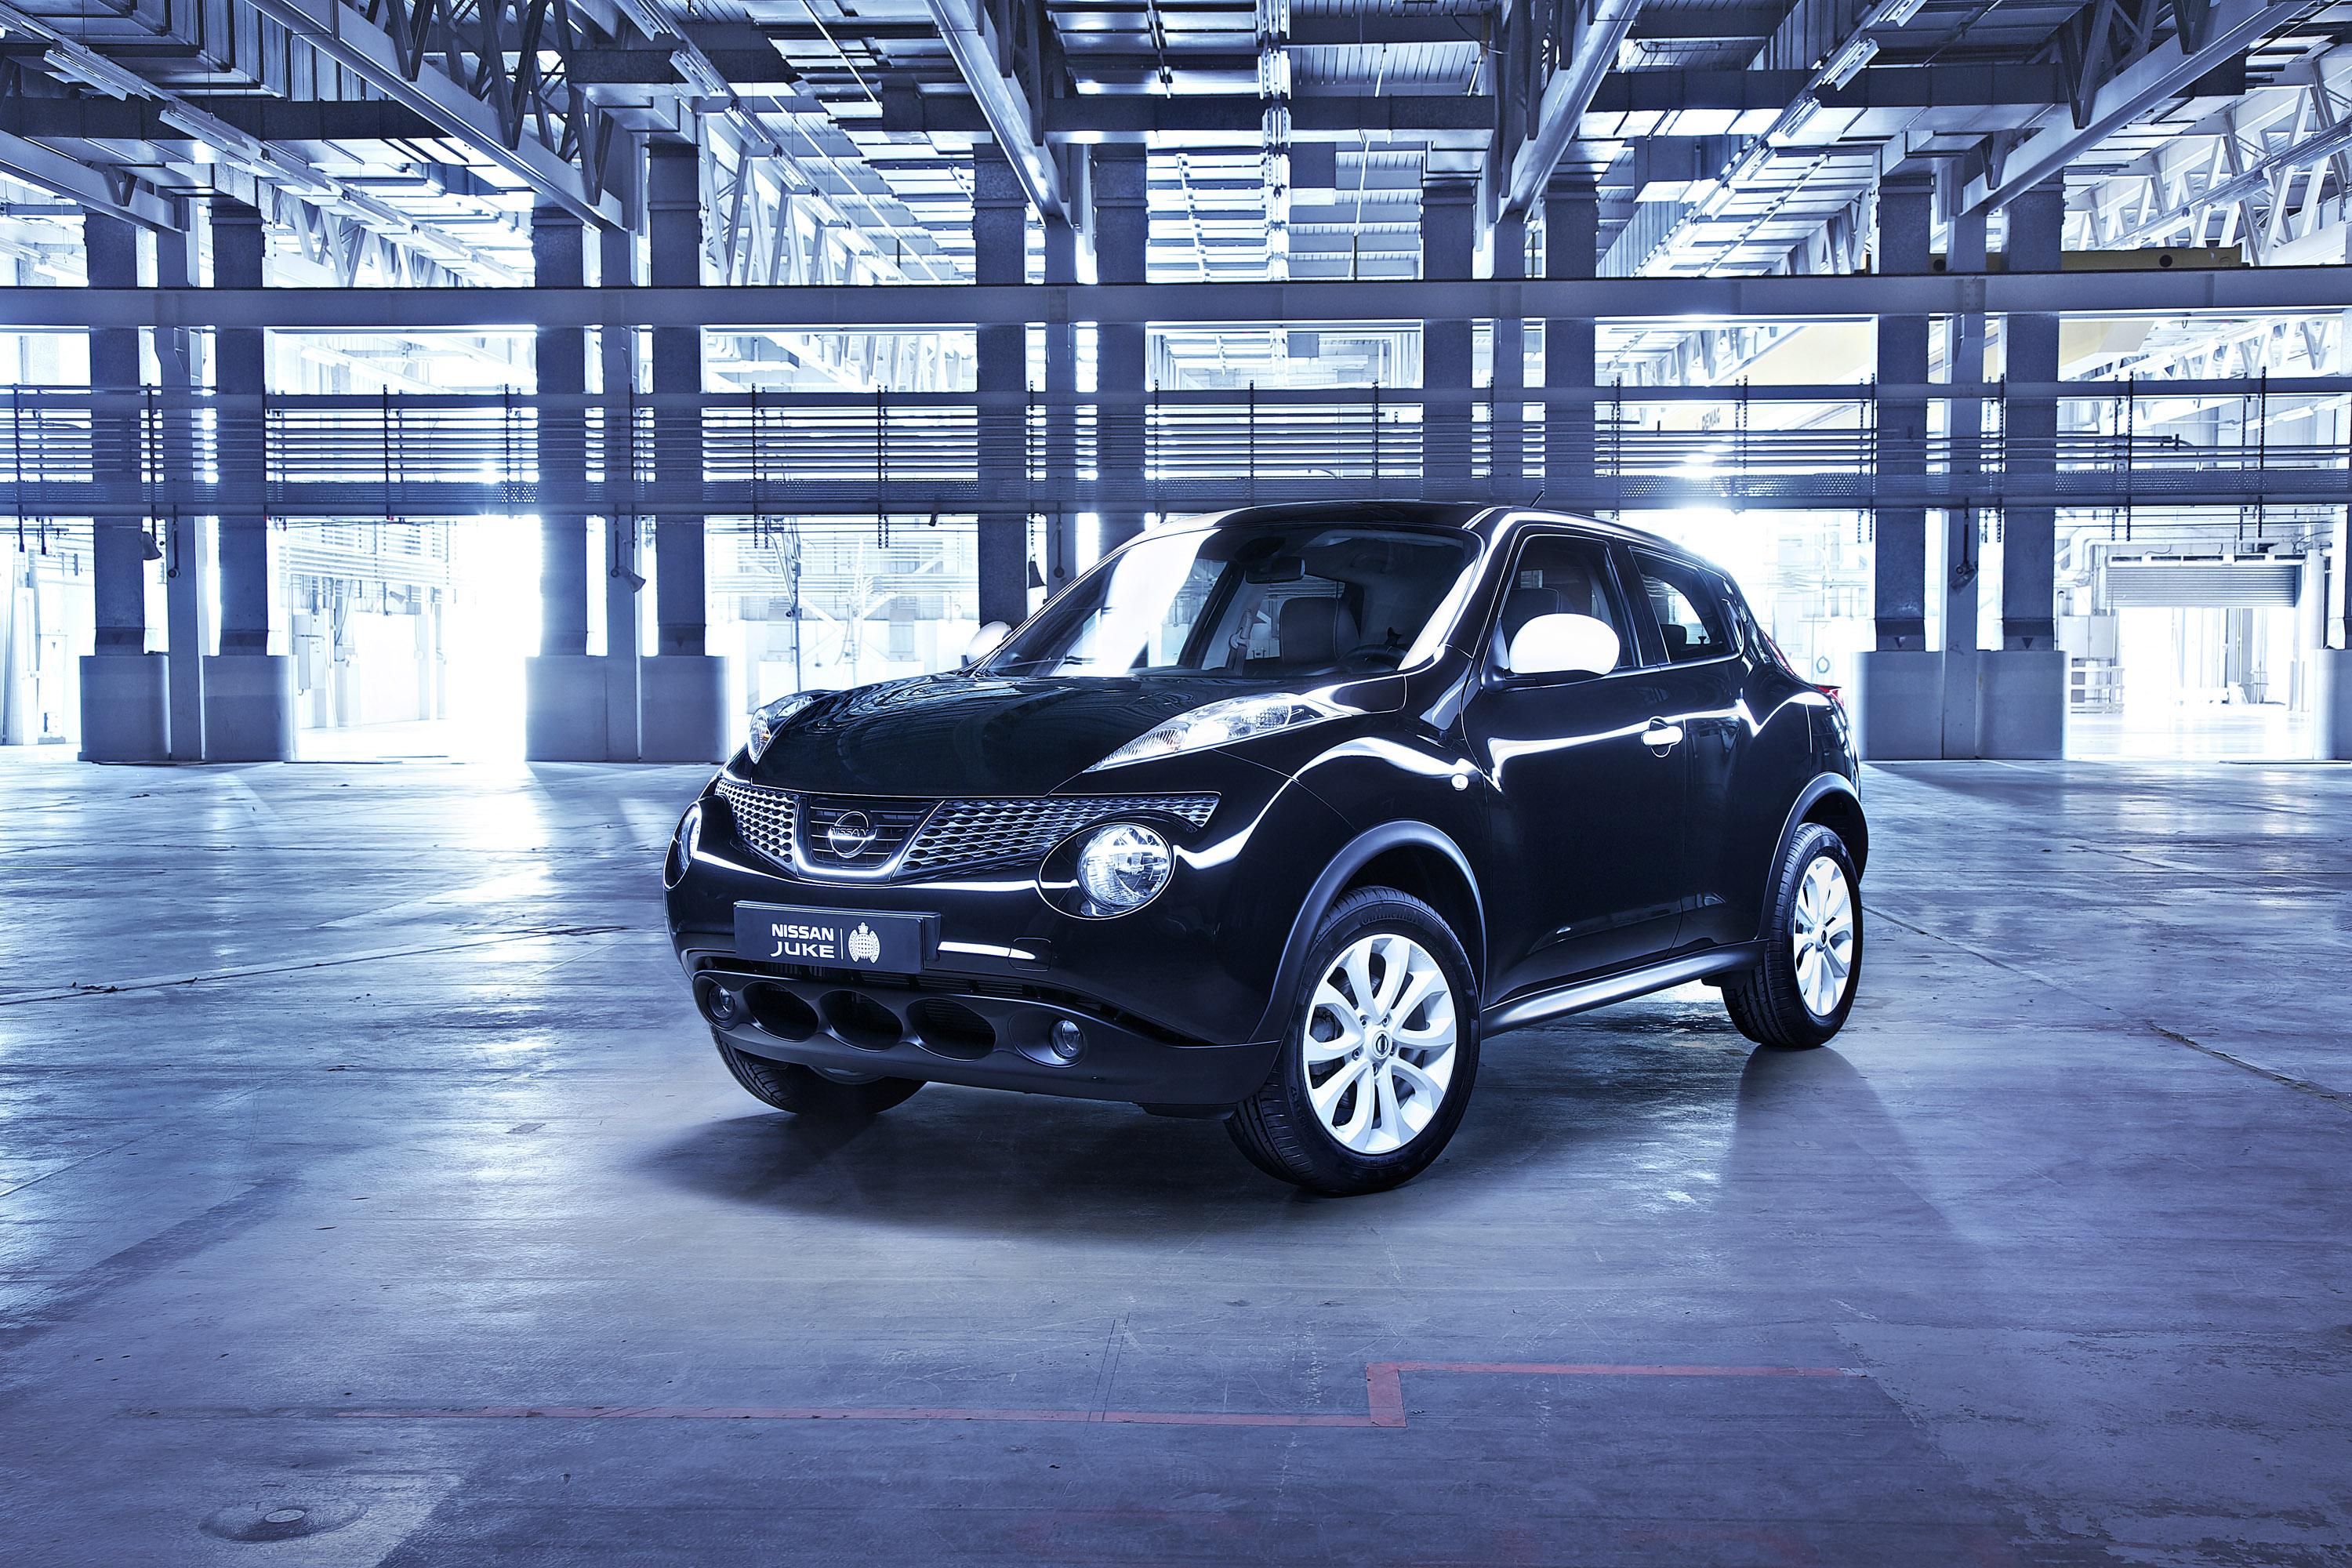 Nissan Juke Ministry of Sound Limited Edition photo #3